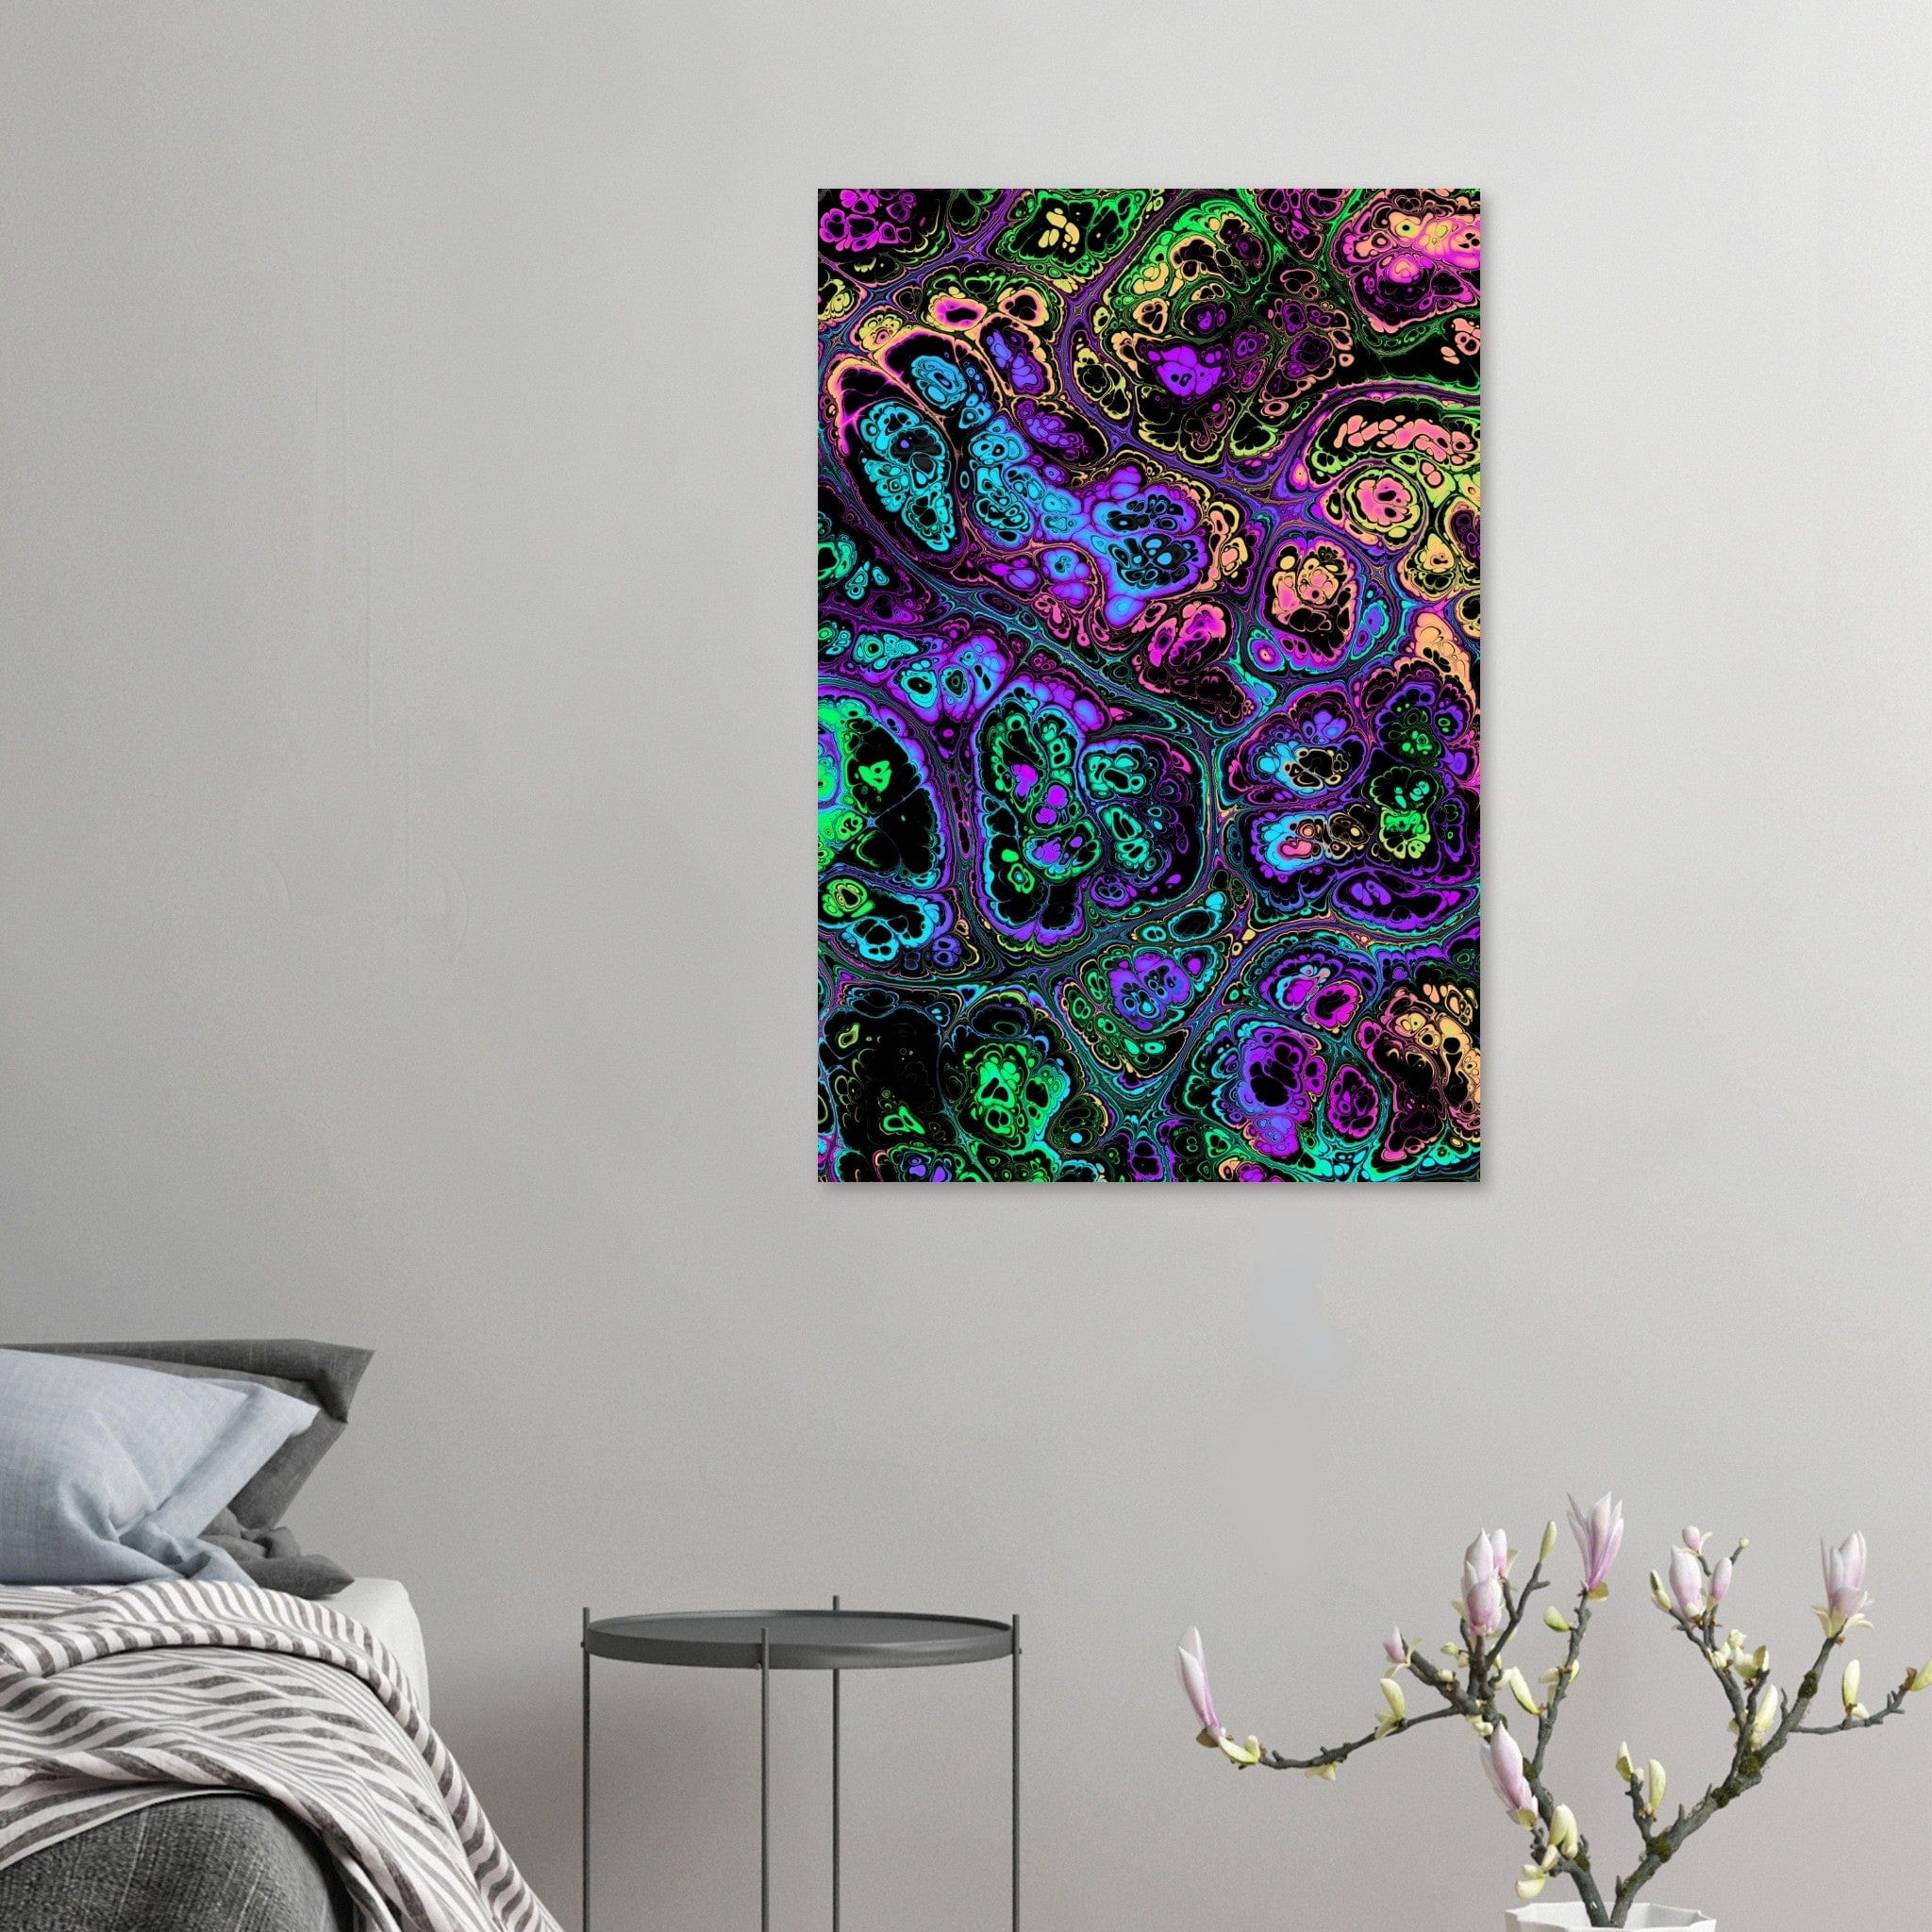 Little Squiffy Print Material 60x90 cm / 24x36″ / Vertical Neon Psychedelic Marble Aluminum Print Wall Art